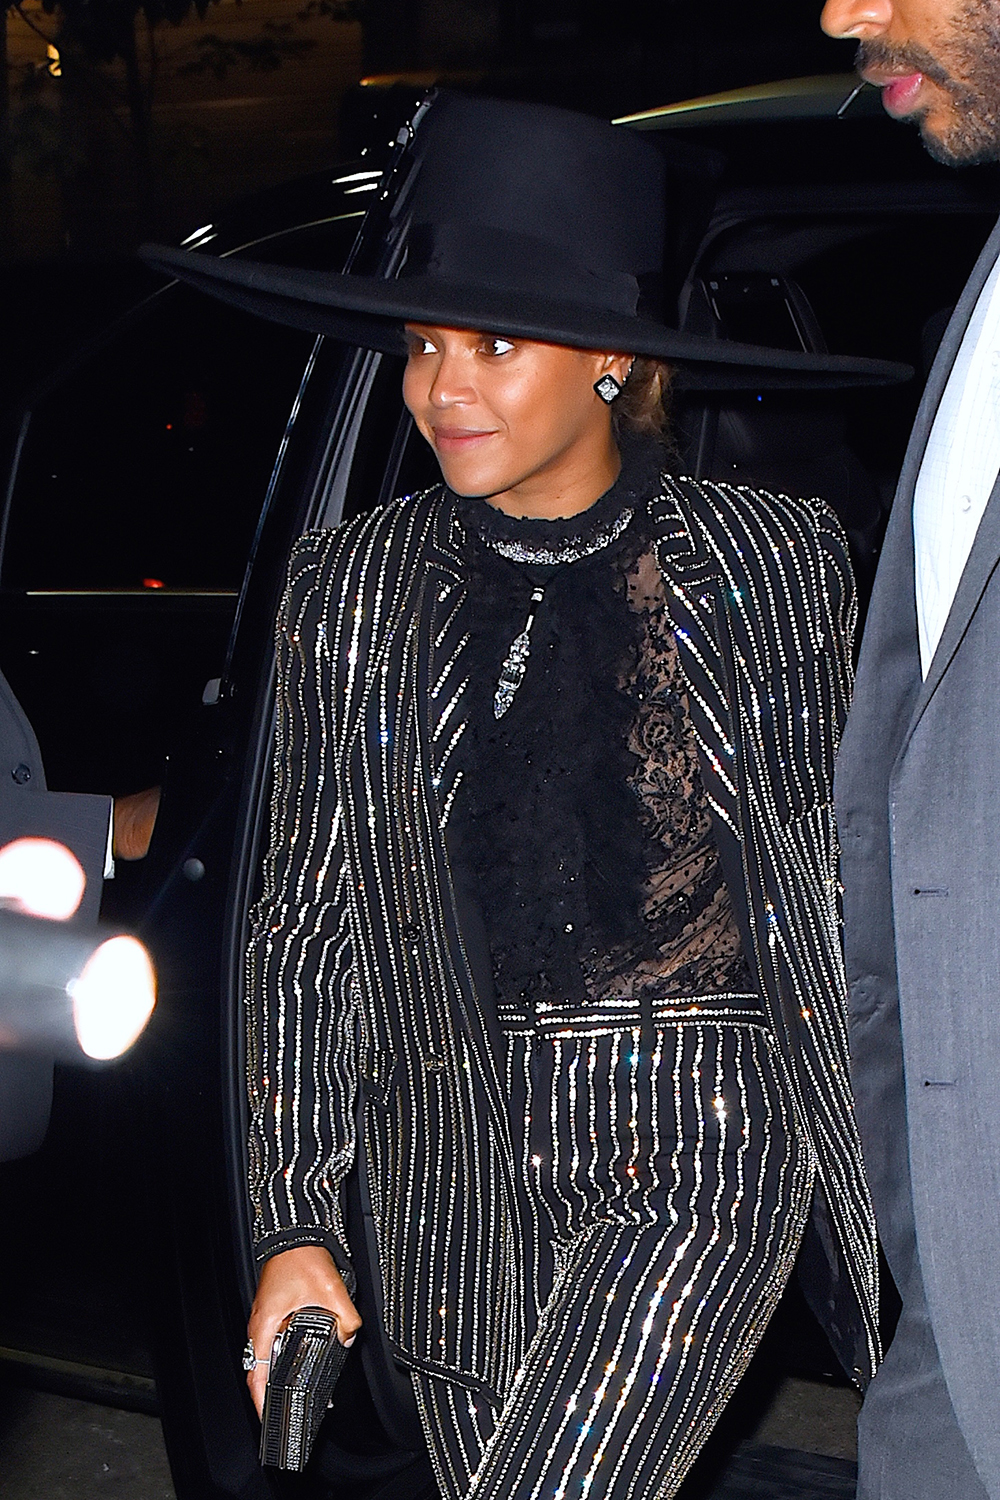 Beyonce rocks custom Givenchy to collect the Style Icon Award at the CFDA Awards in New York.